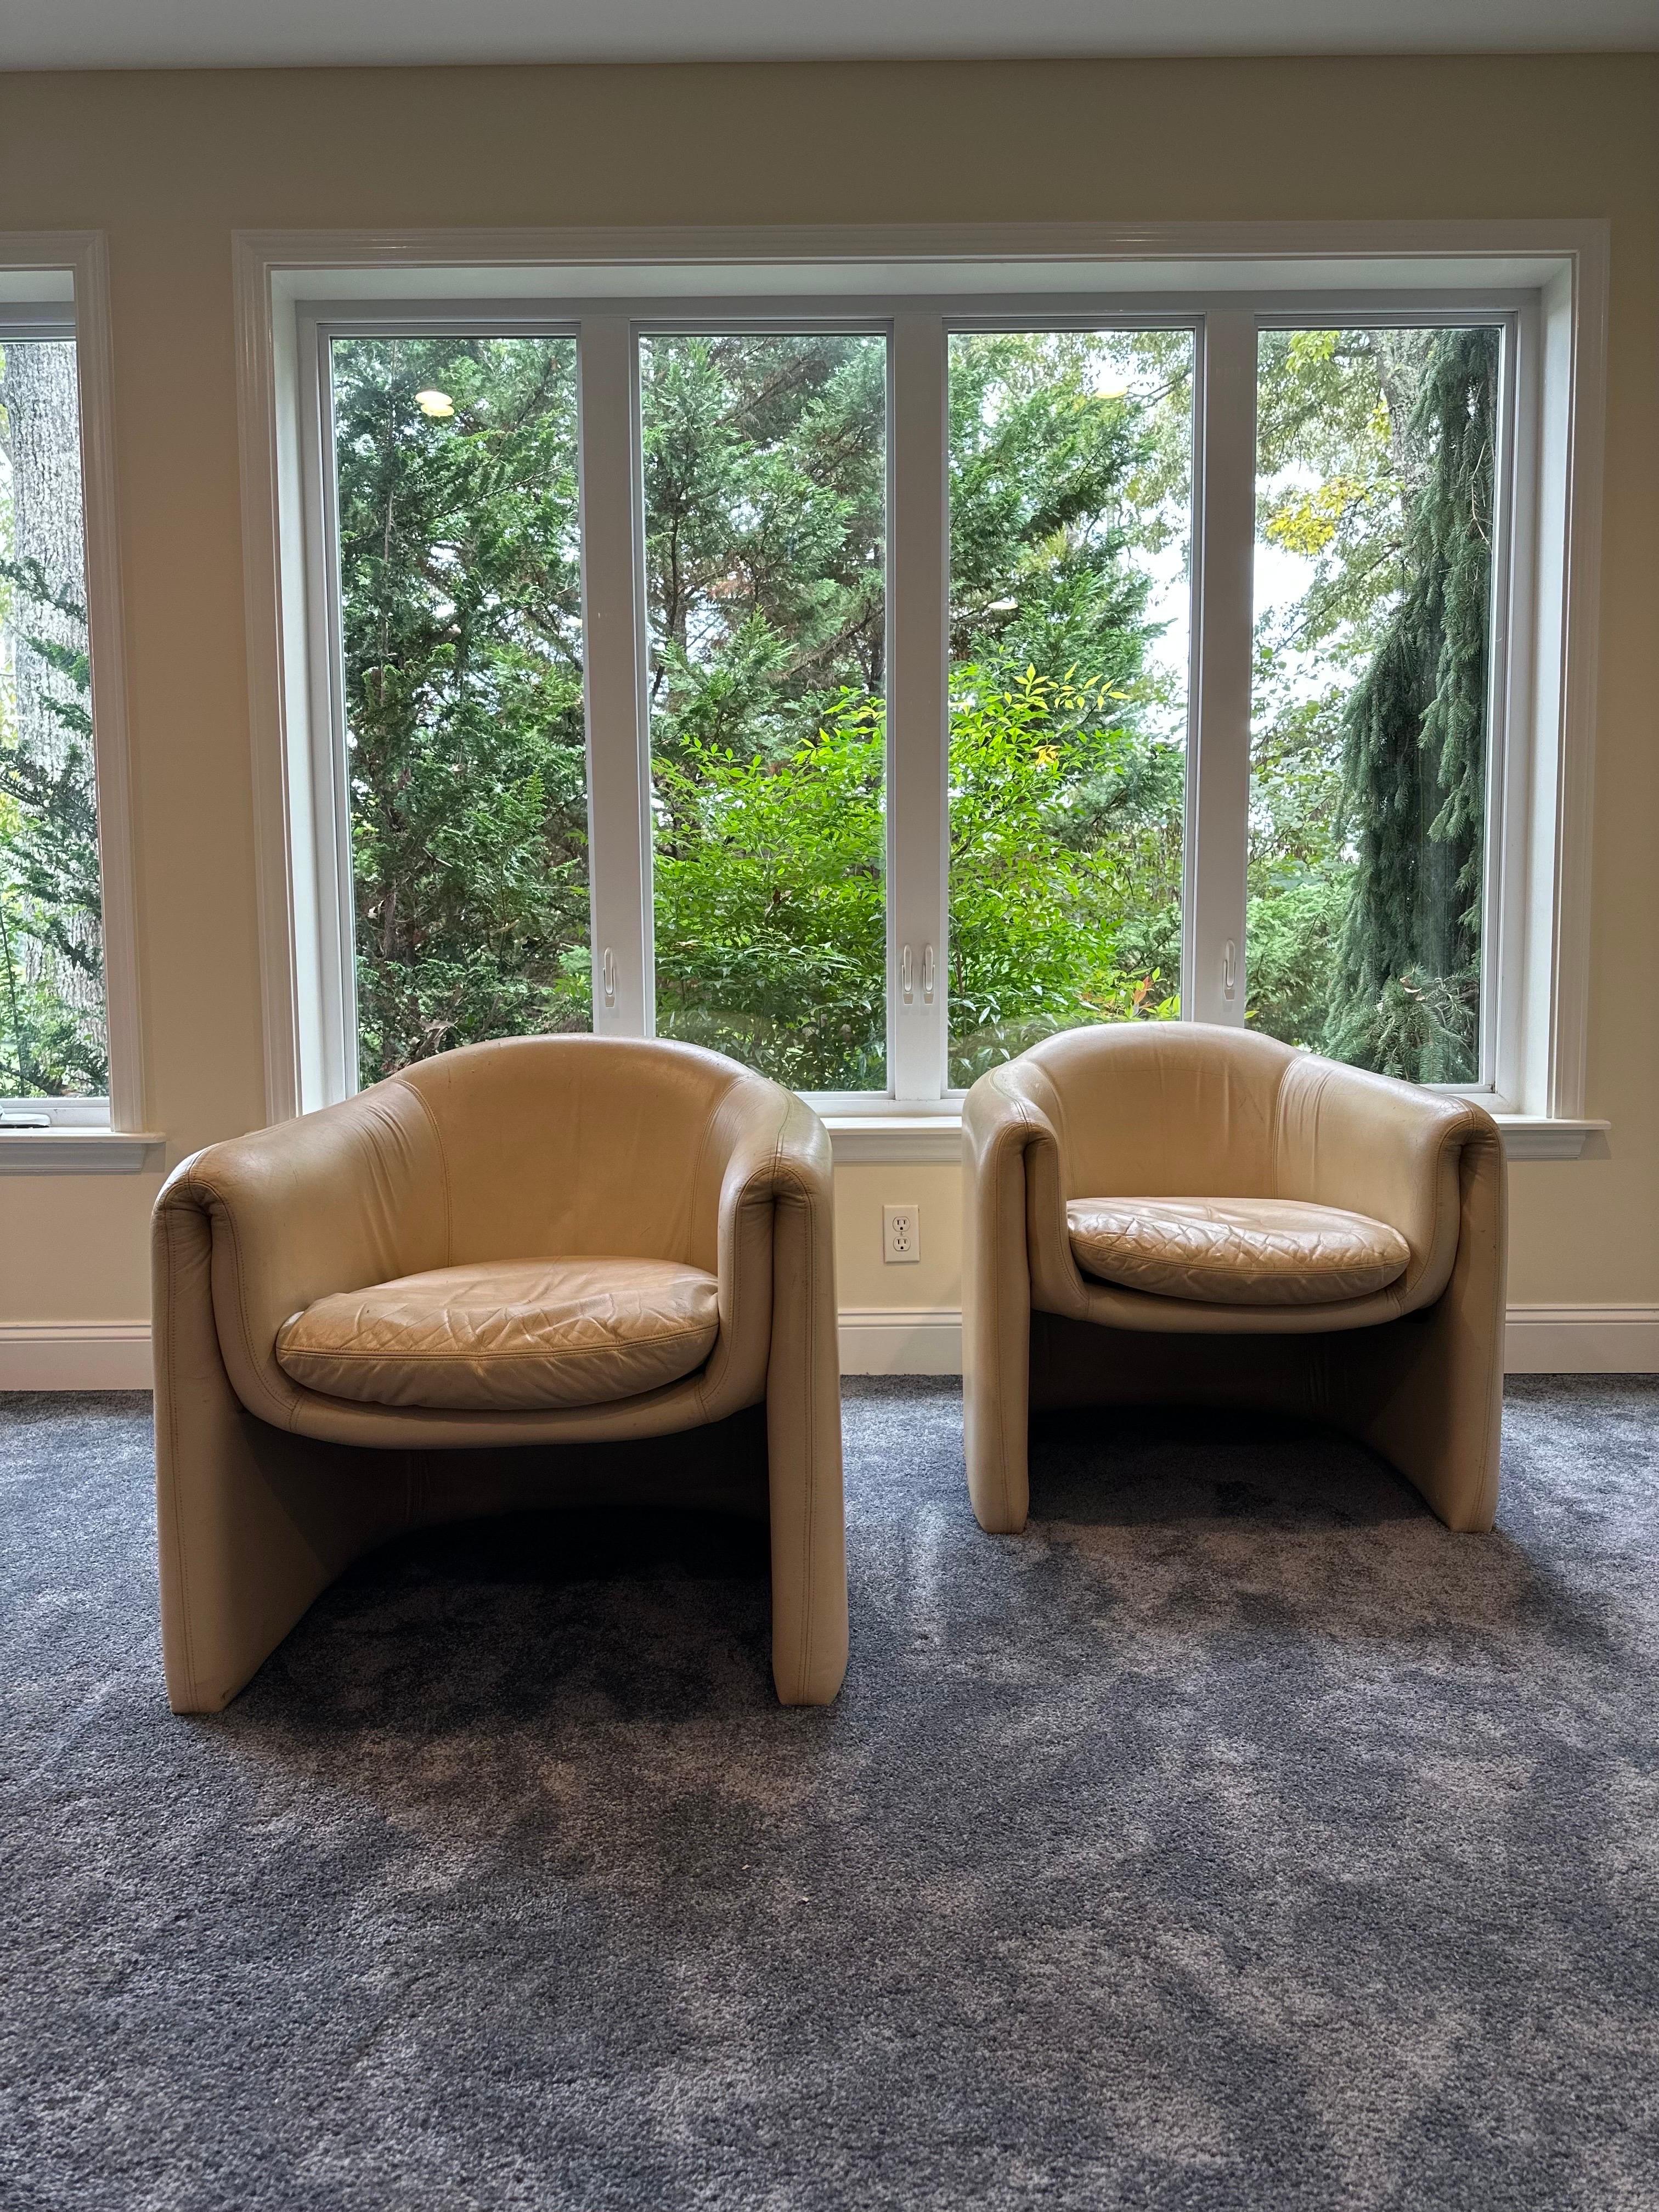 Pair of iconic lounge barrel chairs designed by Vladimir Kagan for Preview, tagged 1986. The chairs have an appealing biomorphic shape that is also very comfortable. Stylish and sophisticated.